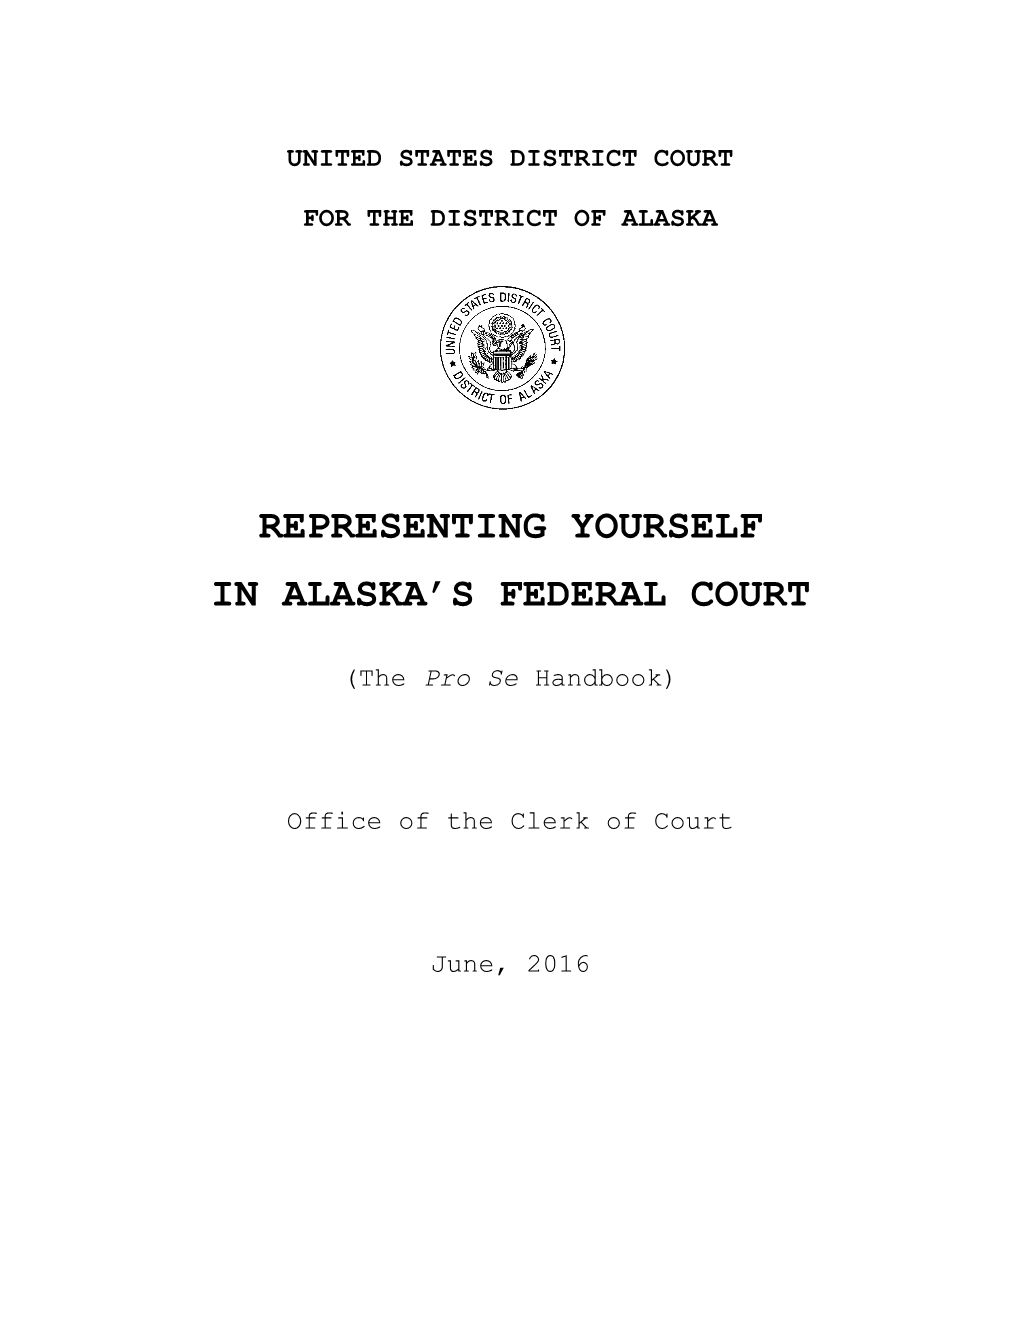 Representing Yourself in Alaska's Federal Court